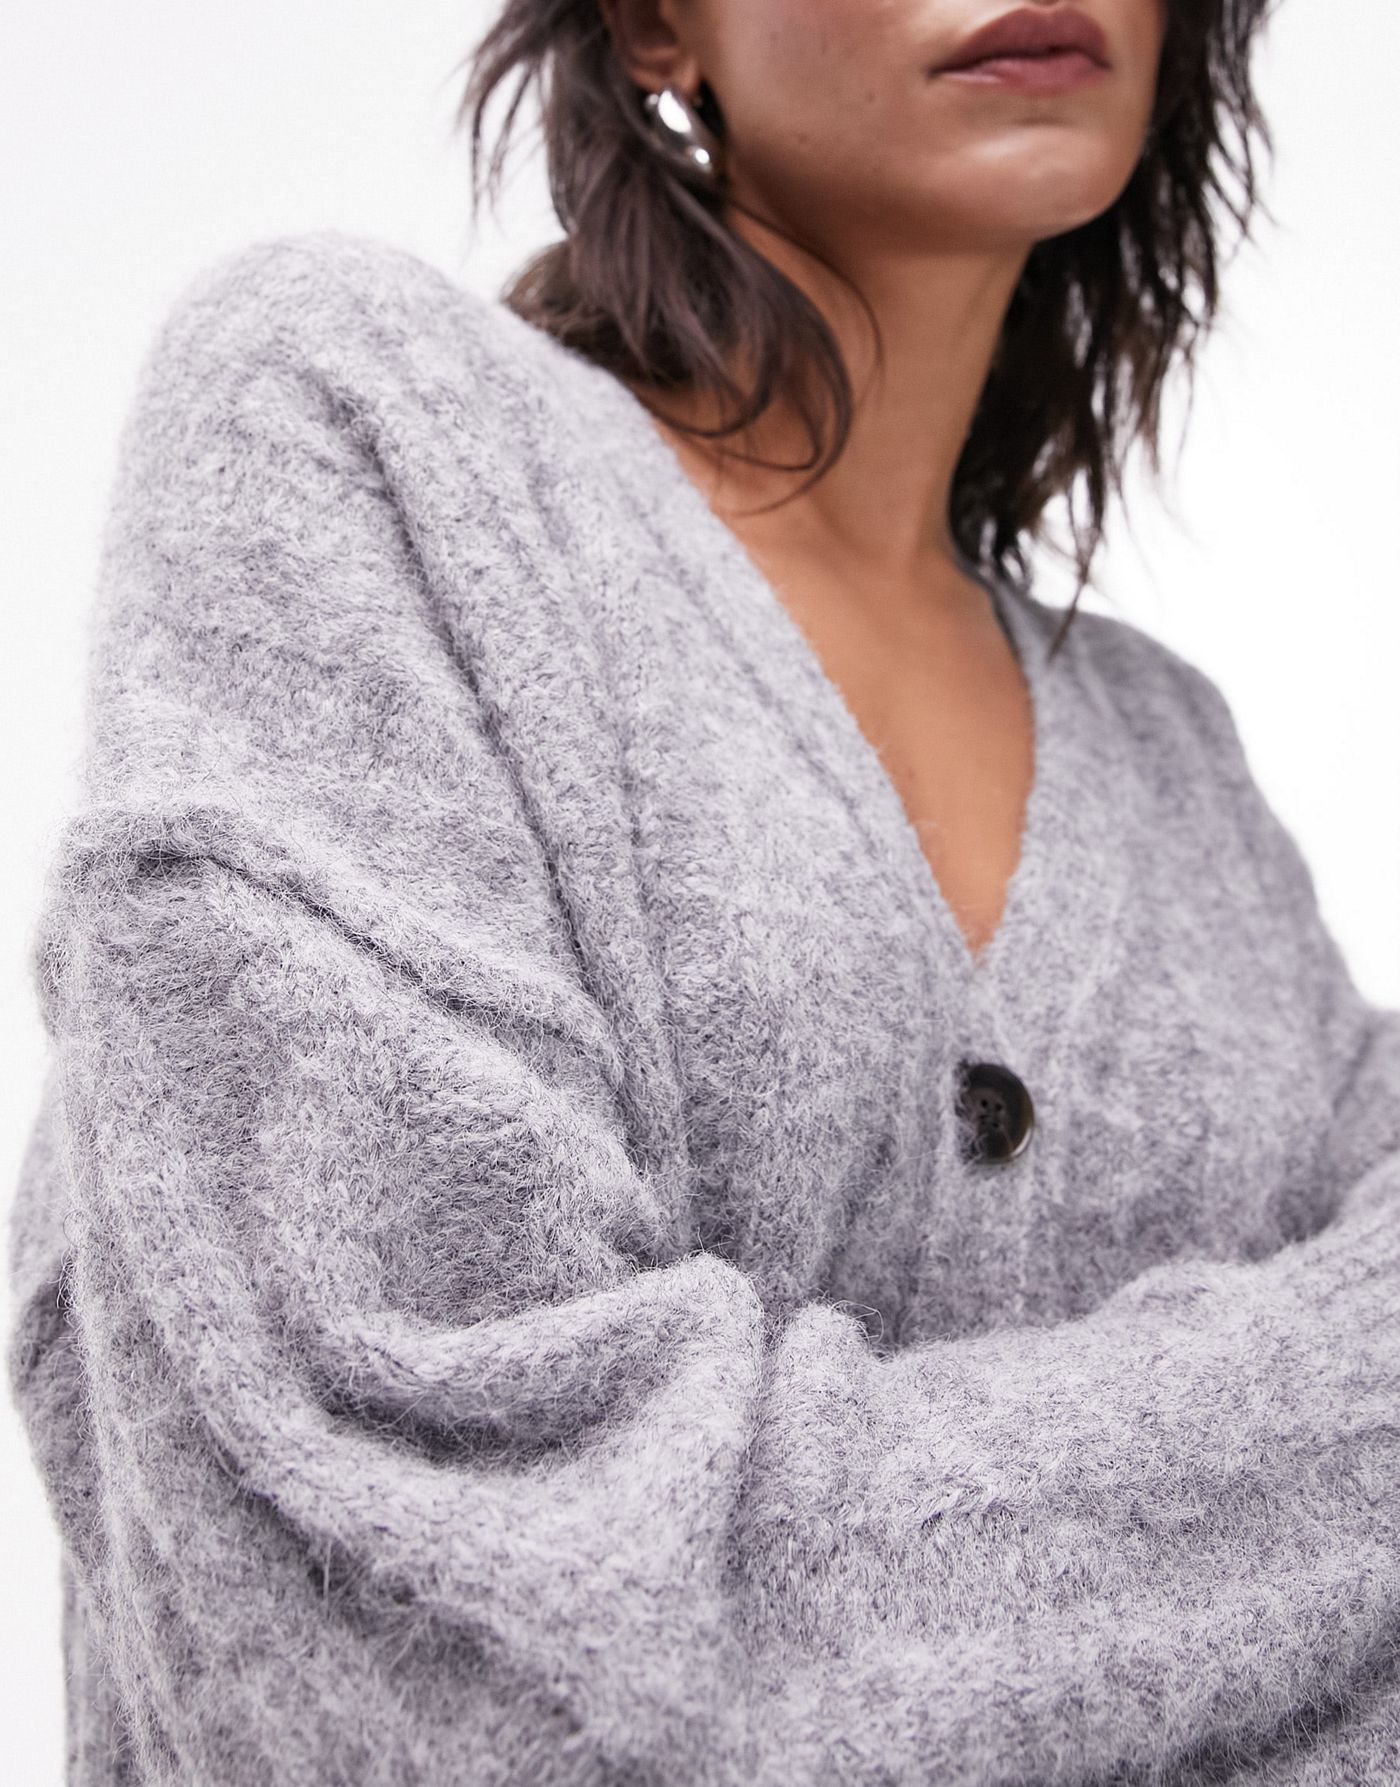 Topshop knitted fluffy v-neck cardigan in grey